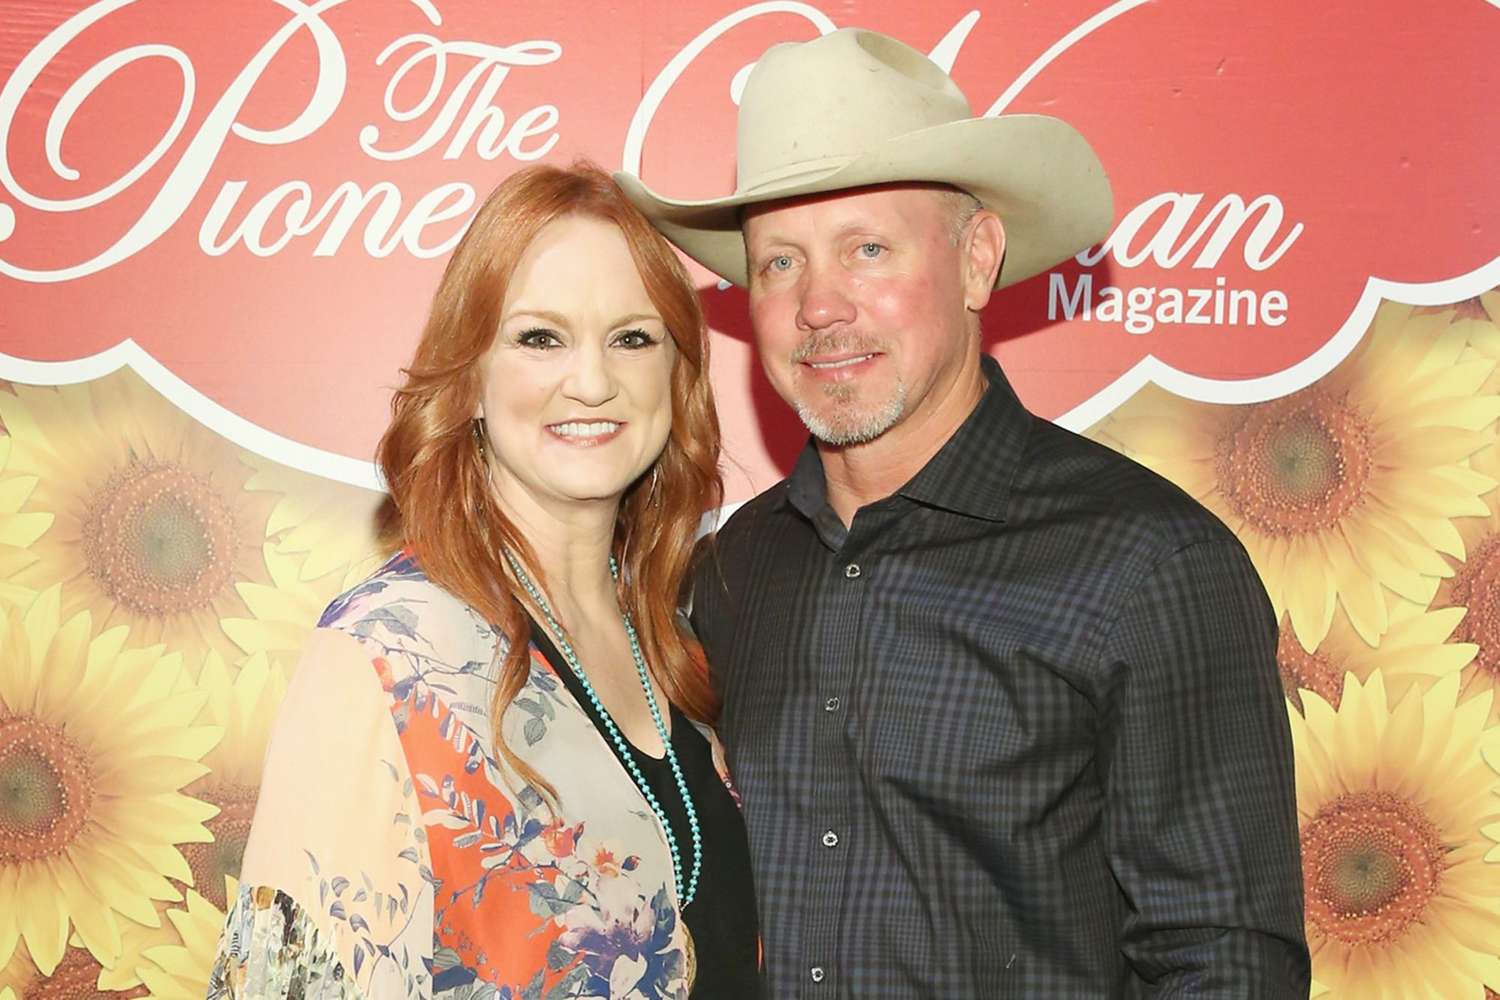 Ree Drummond’s fans noticed something different about her nephew